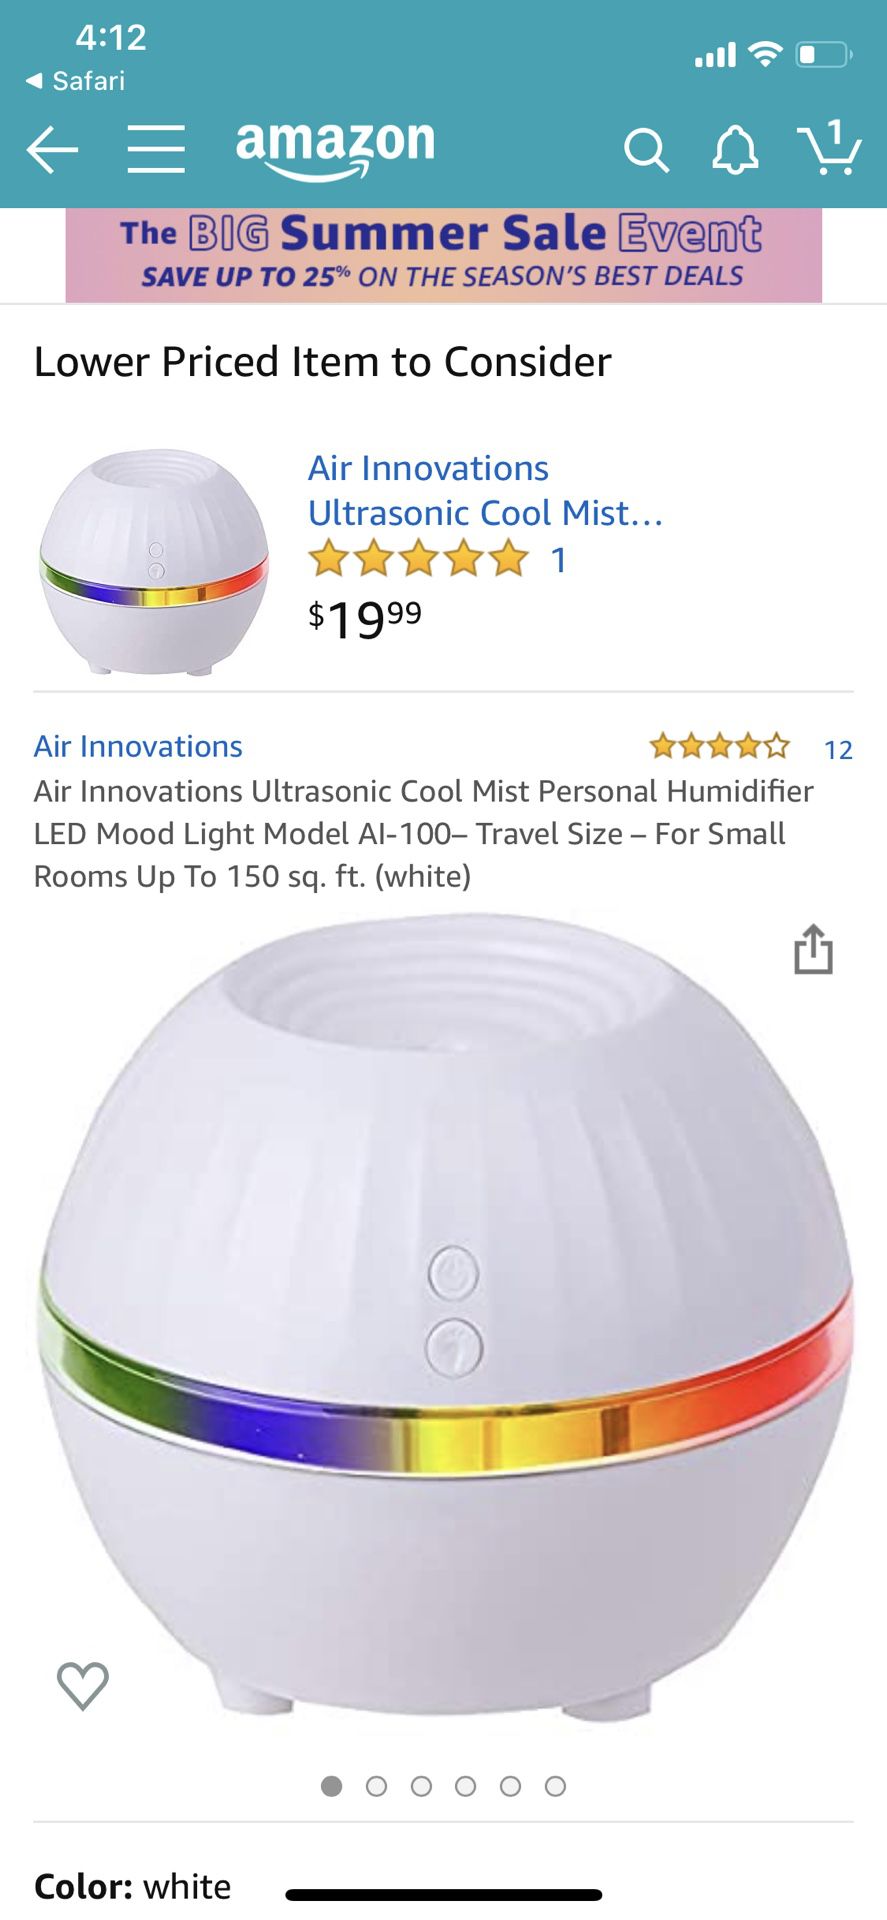 Personal Humidifier, Air Innovations